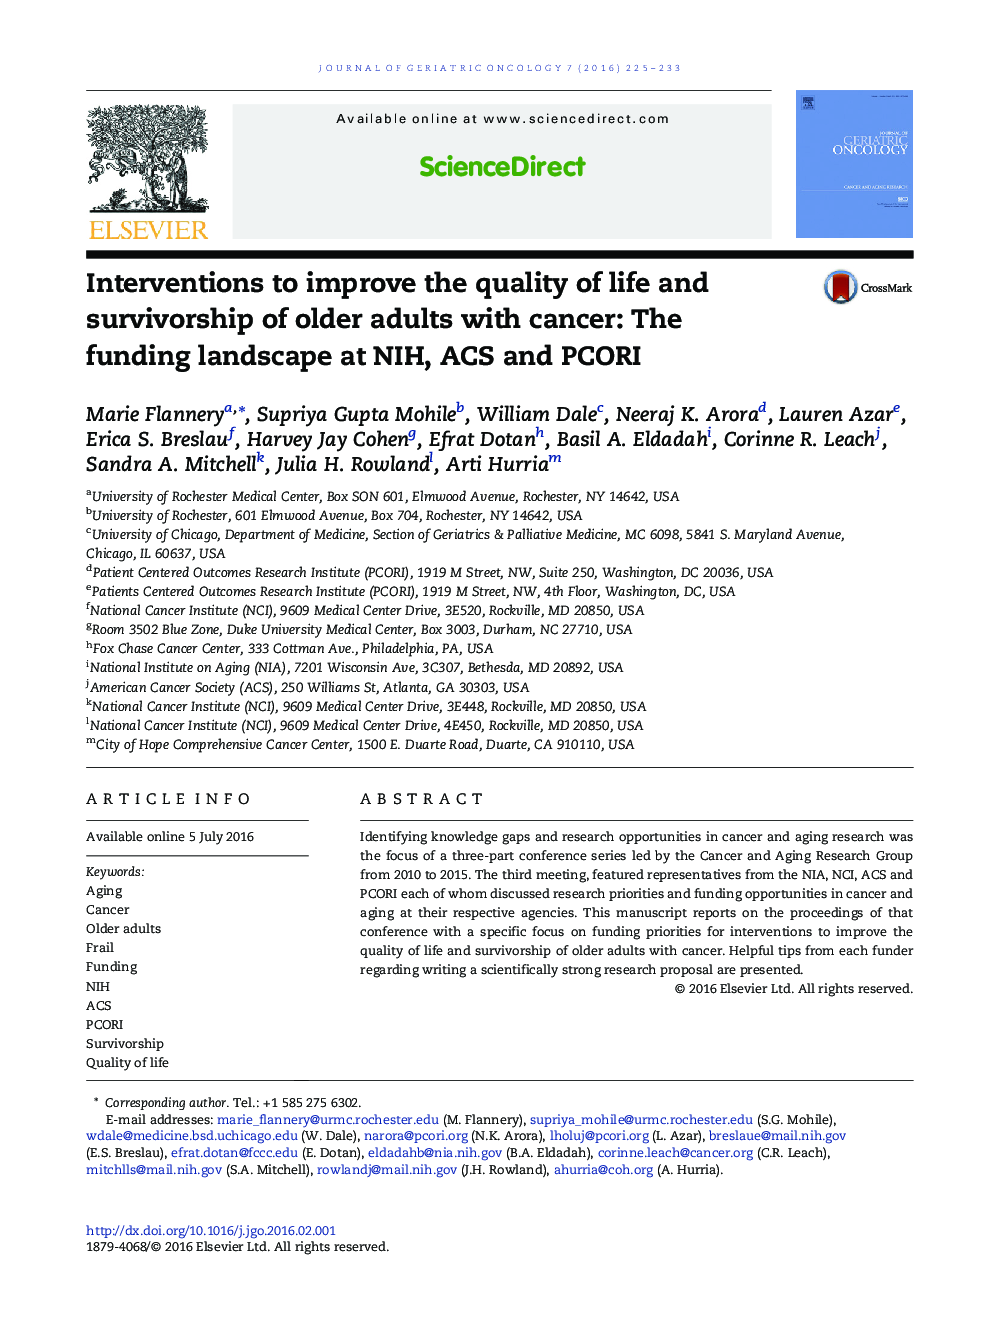 Interventions to improve the quality of life and survivorship of older adults with cancer: The funding landscape at NIH, ACS and PCORI